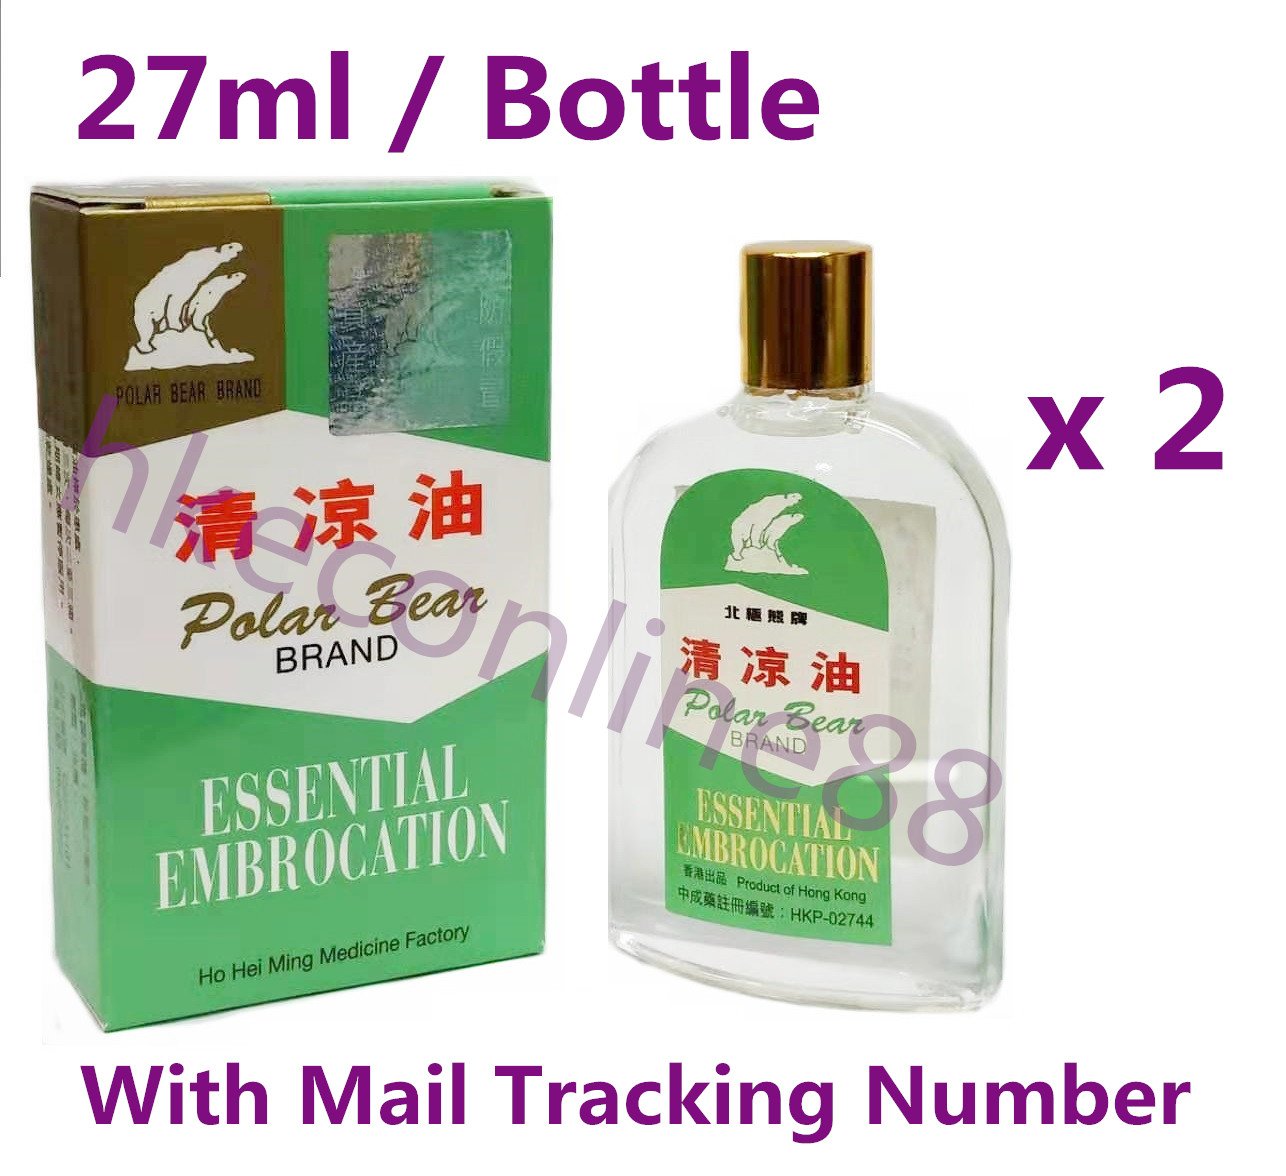 Polar Bear Brand Essential Embrocation oil Chinese Medicated Oil 27ml x 2 Bottles